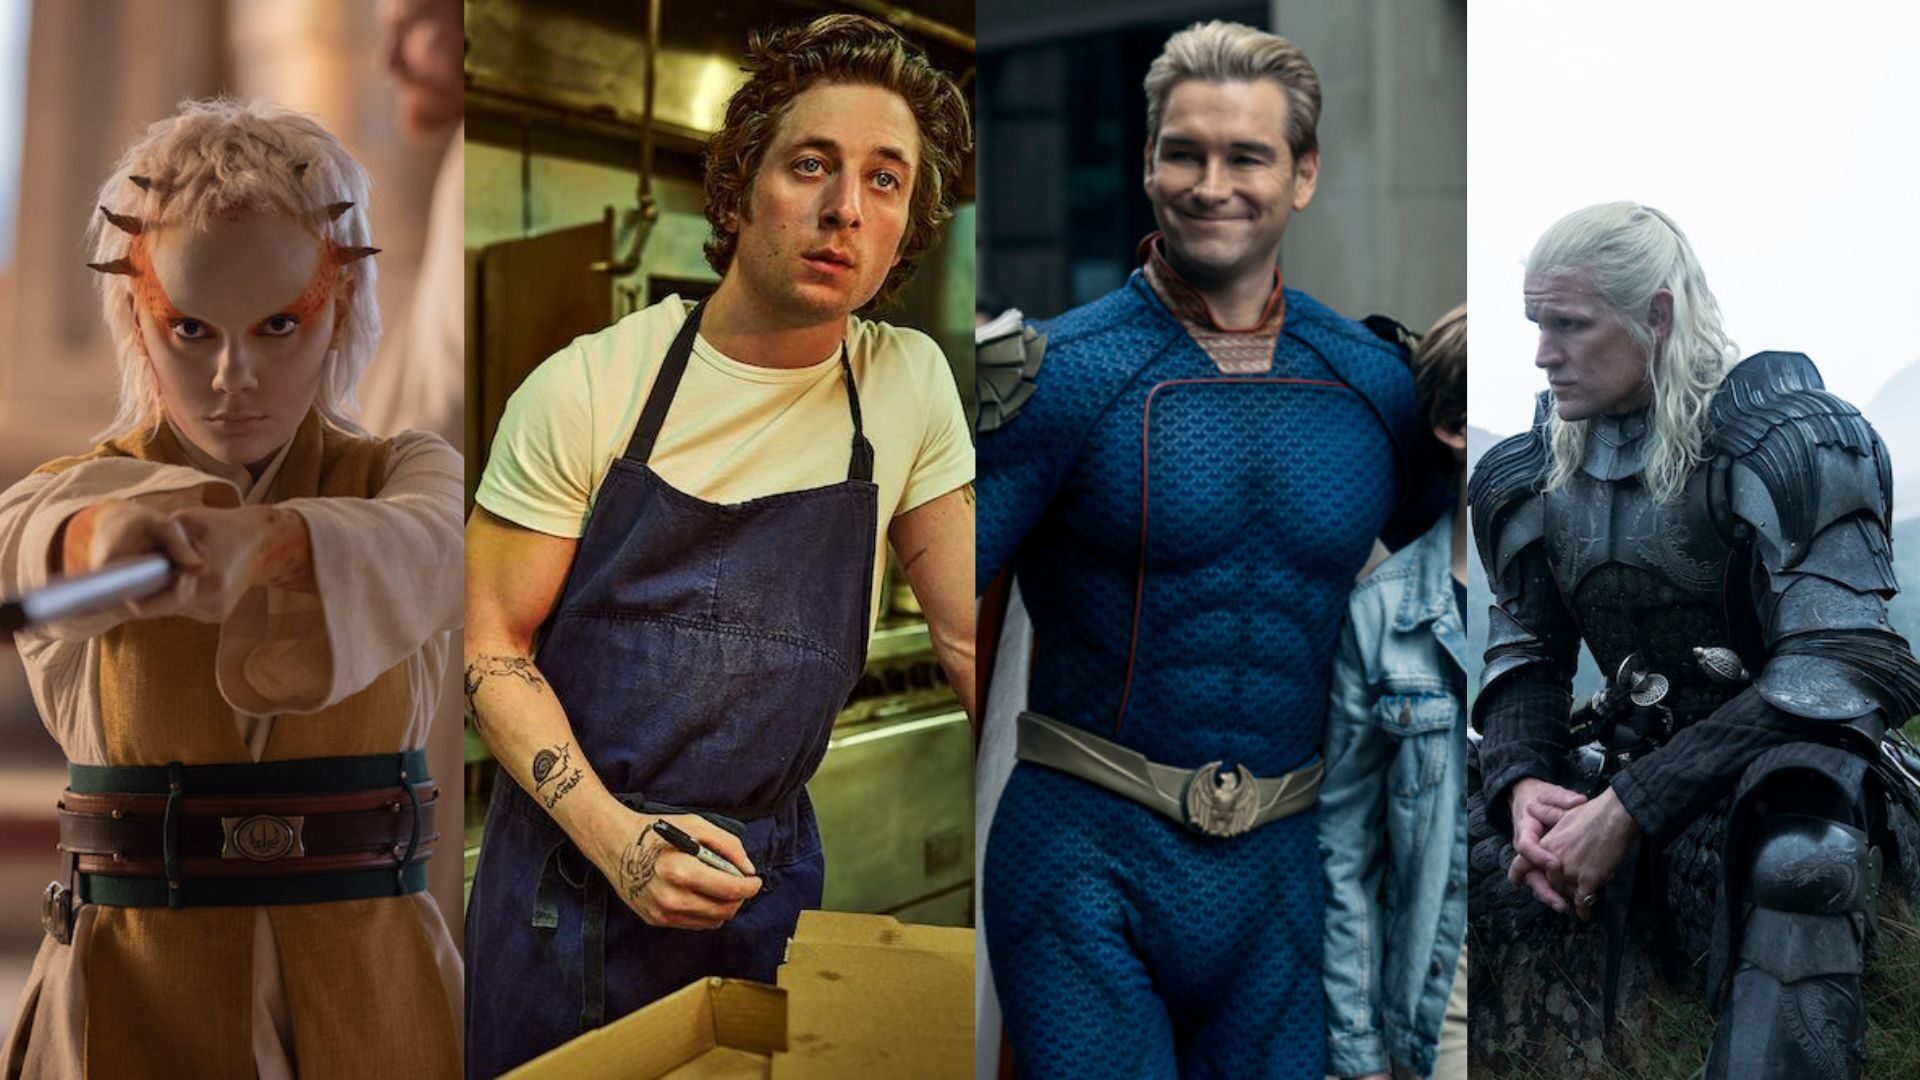 This June, four brand-new TV series will debut from the major streaming services. All four cover different genres and will take audiences to other worlds. However, one thing they have in common is the major potential for awards.